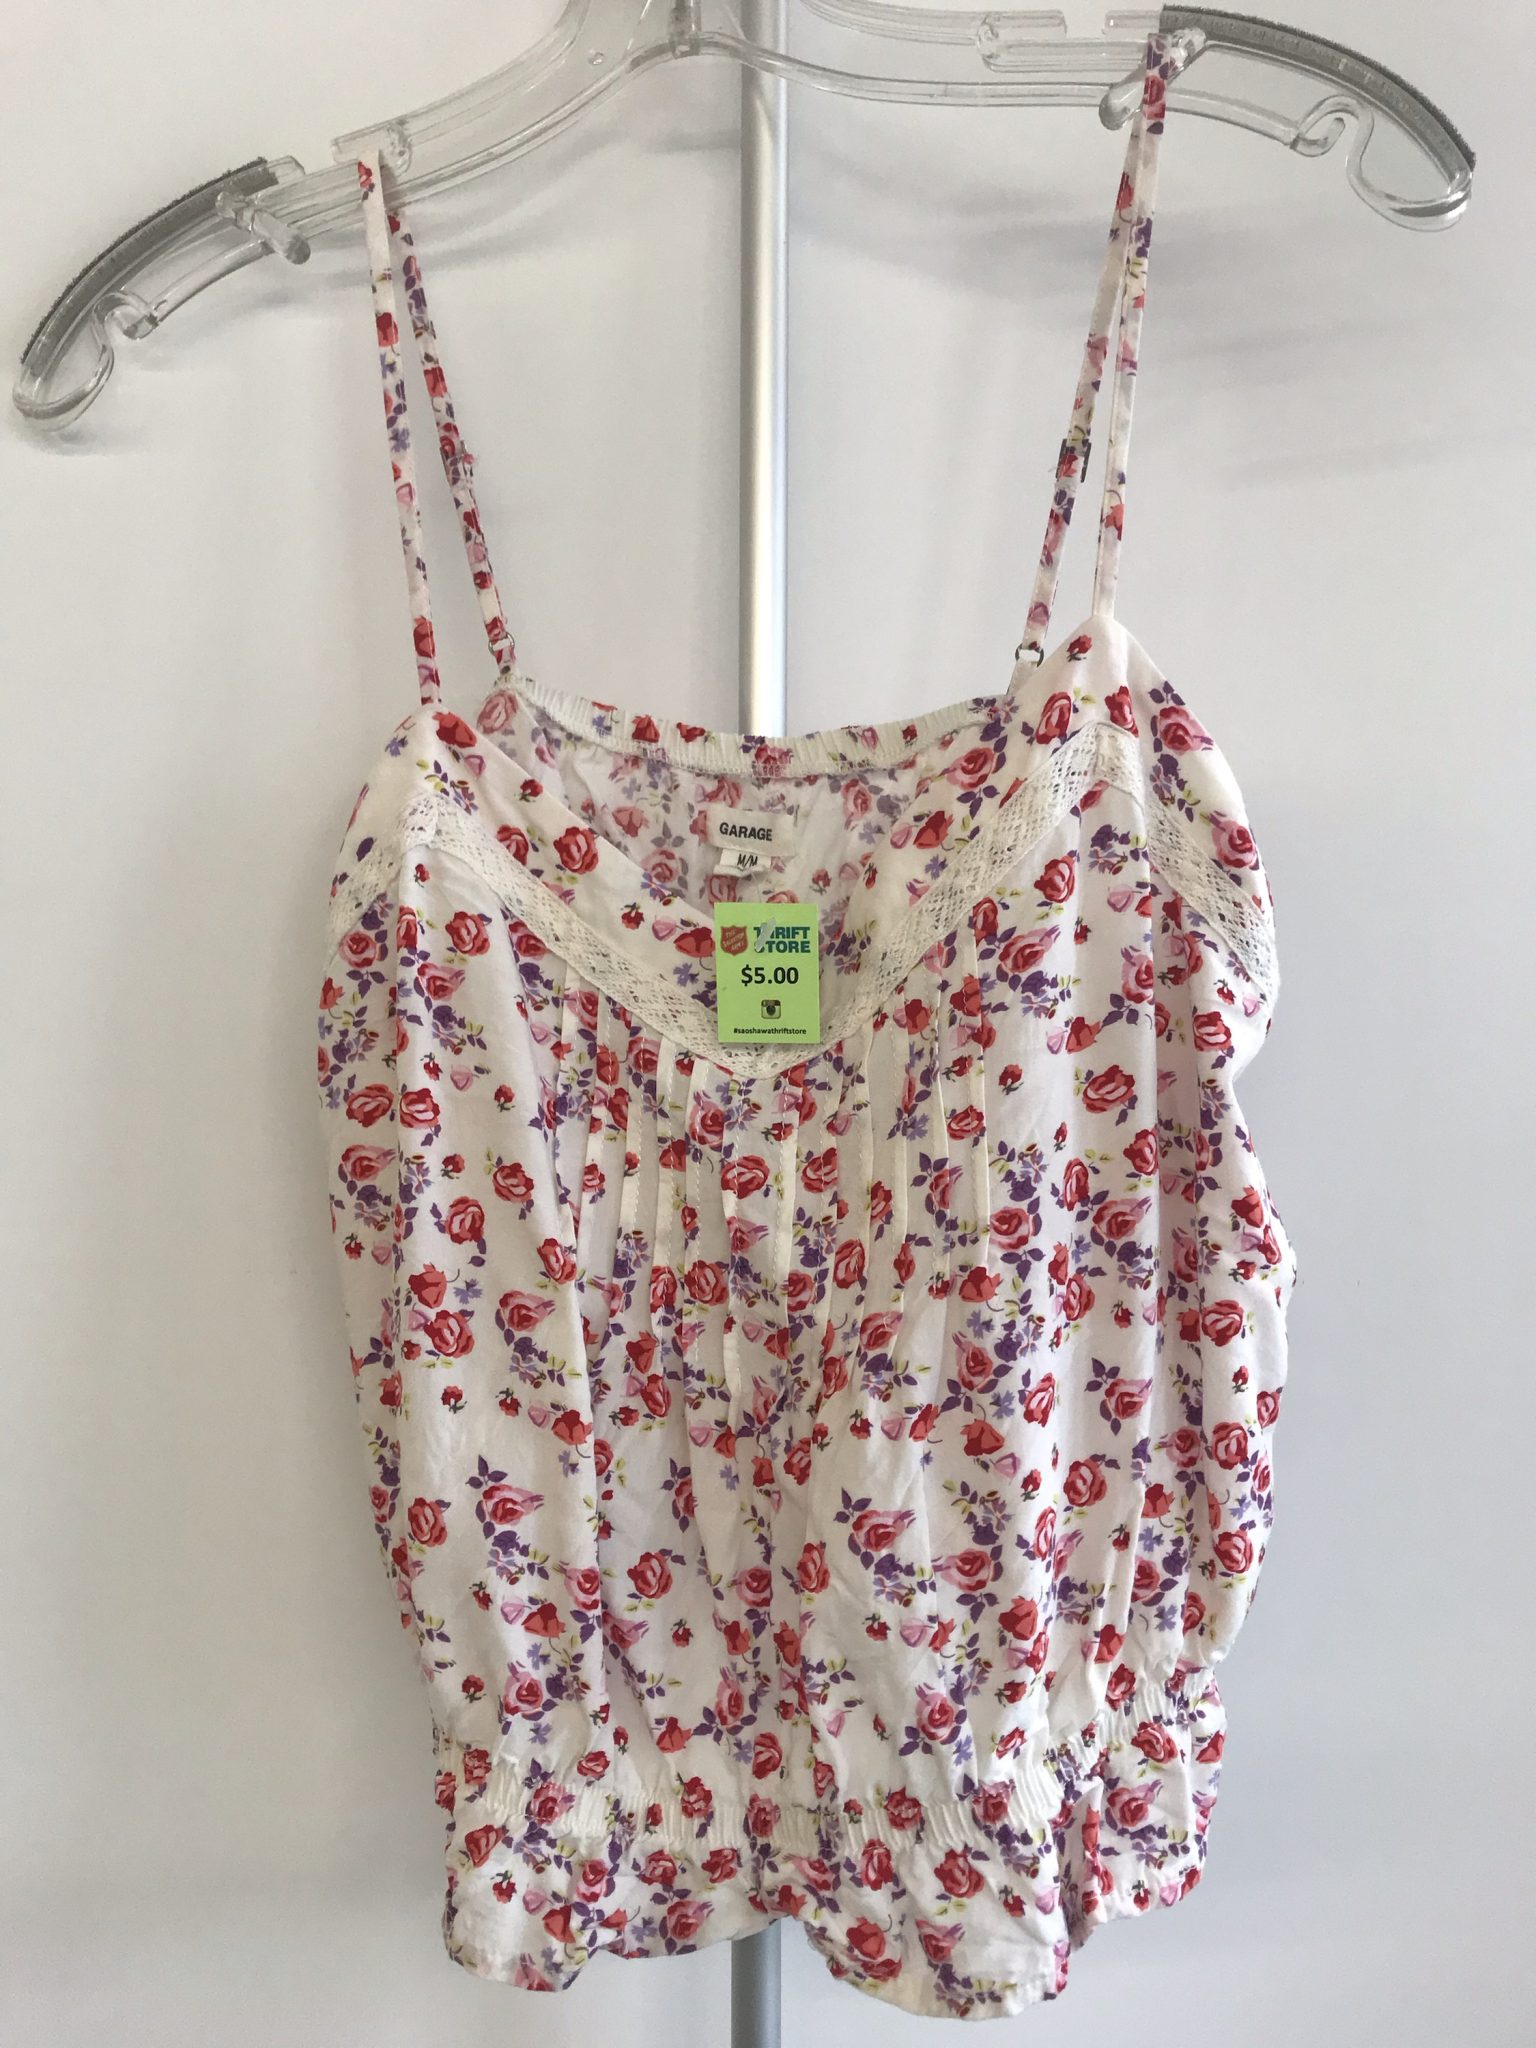 Womens floral tank by Garage